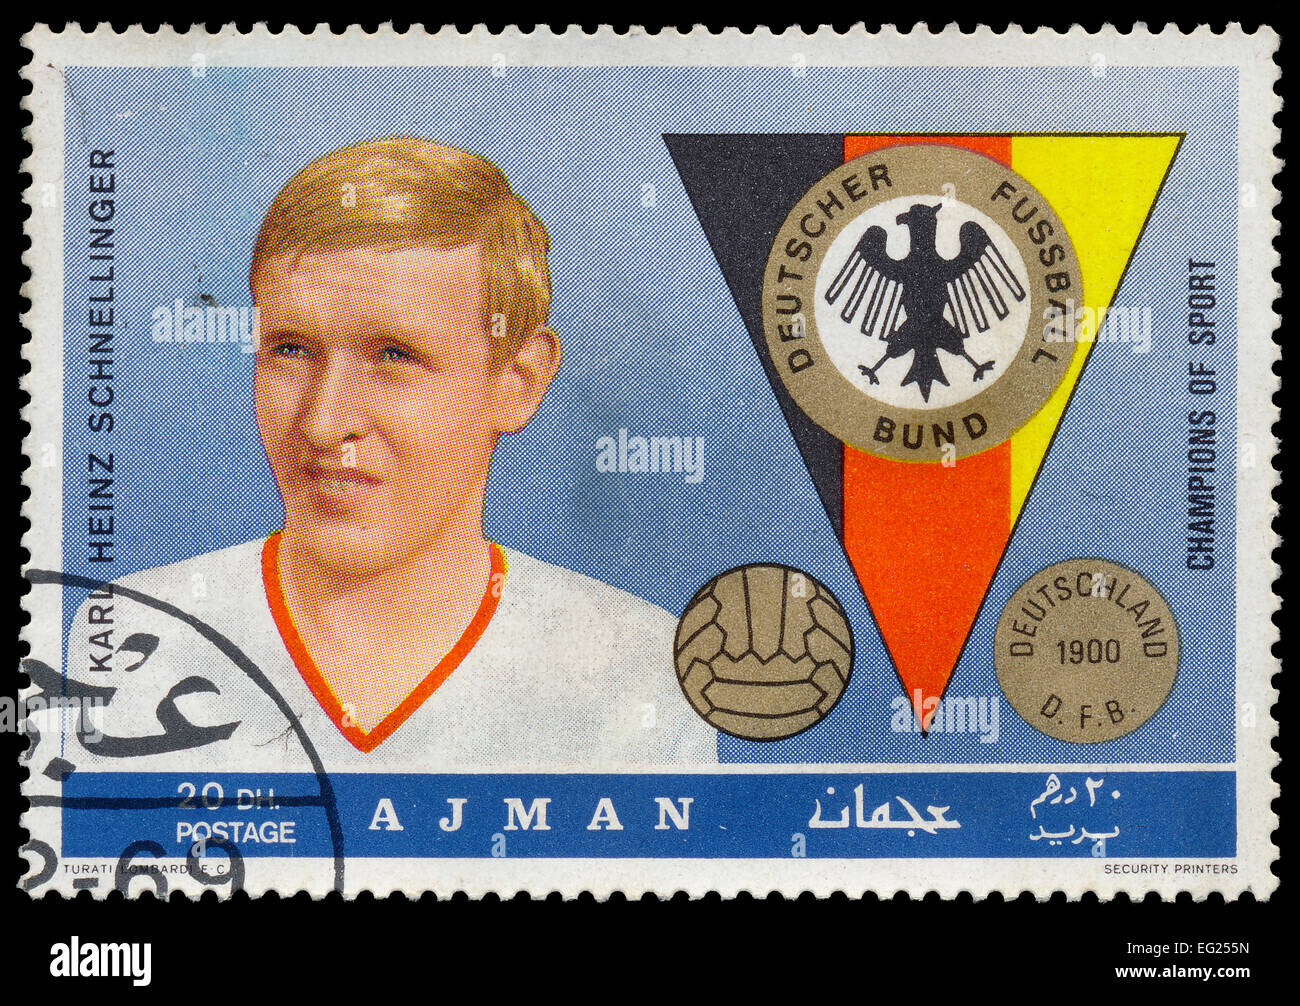 AJMAN - CIRCA 1969: a postage stamp printed in Ajman one of the emirares of the United Arab Emirates showing an image of Karl He Stock Photo